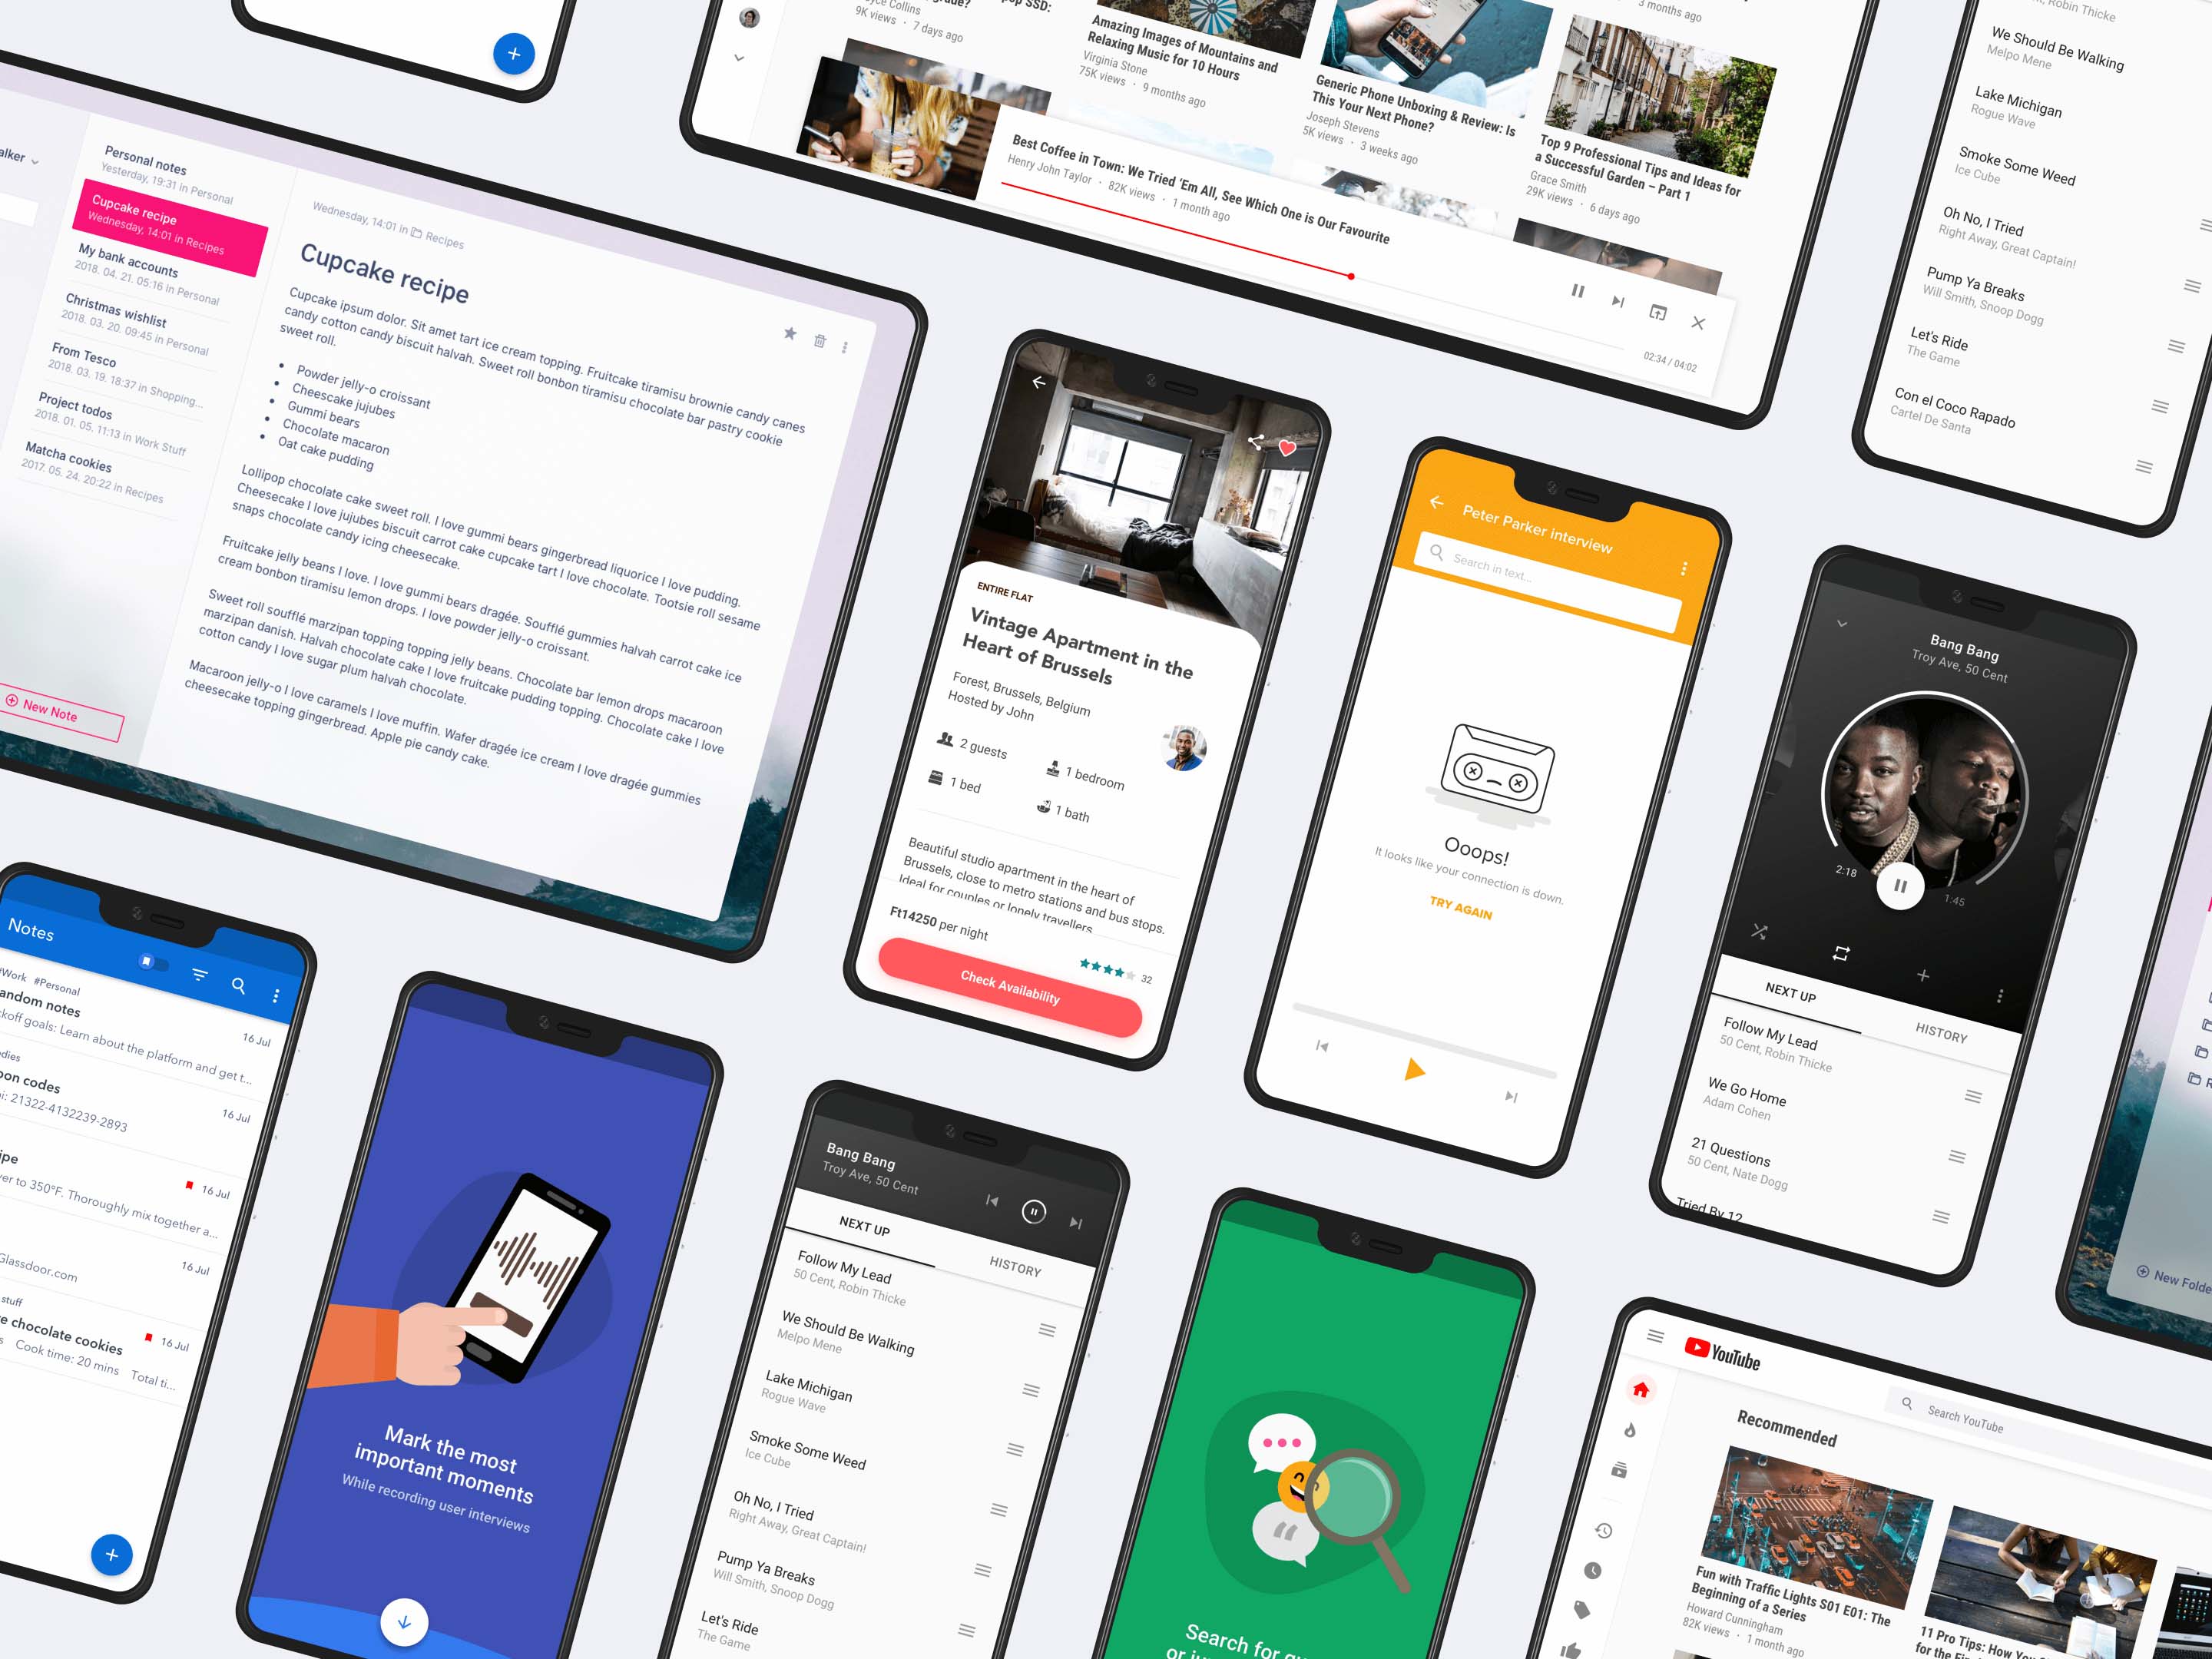 Mockups showing mobile and web app concepts.